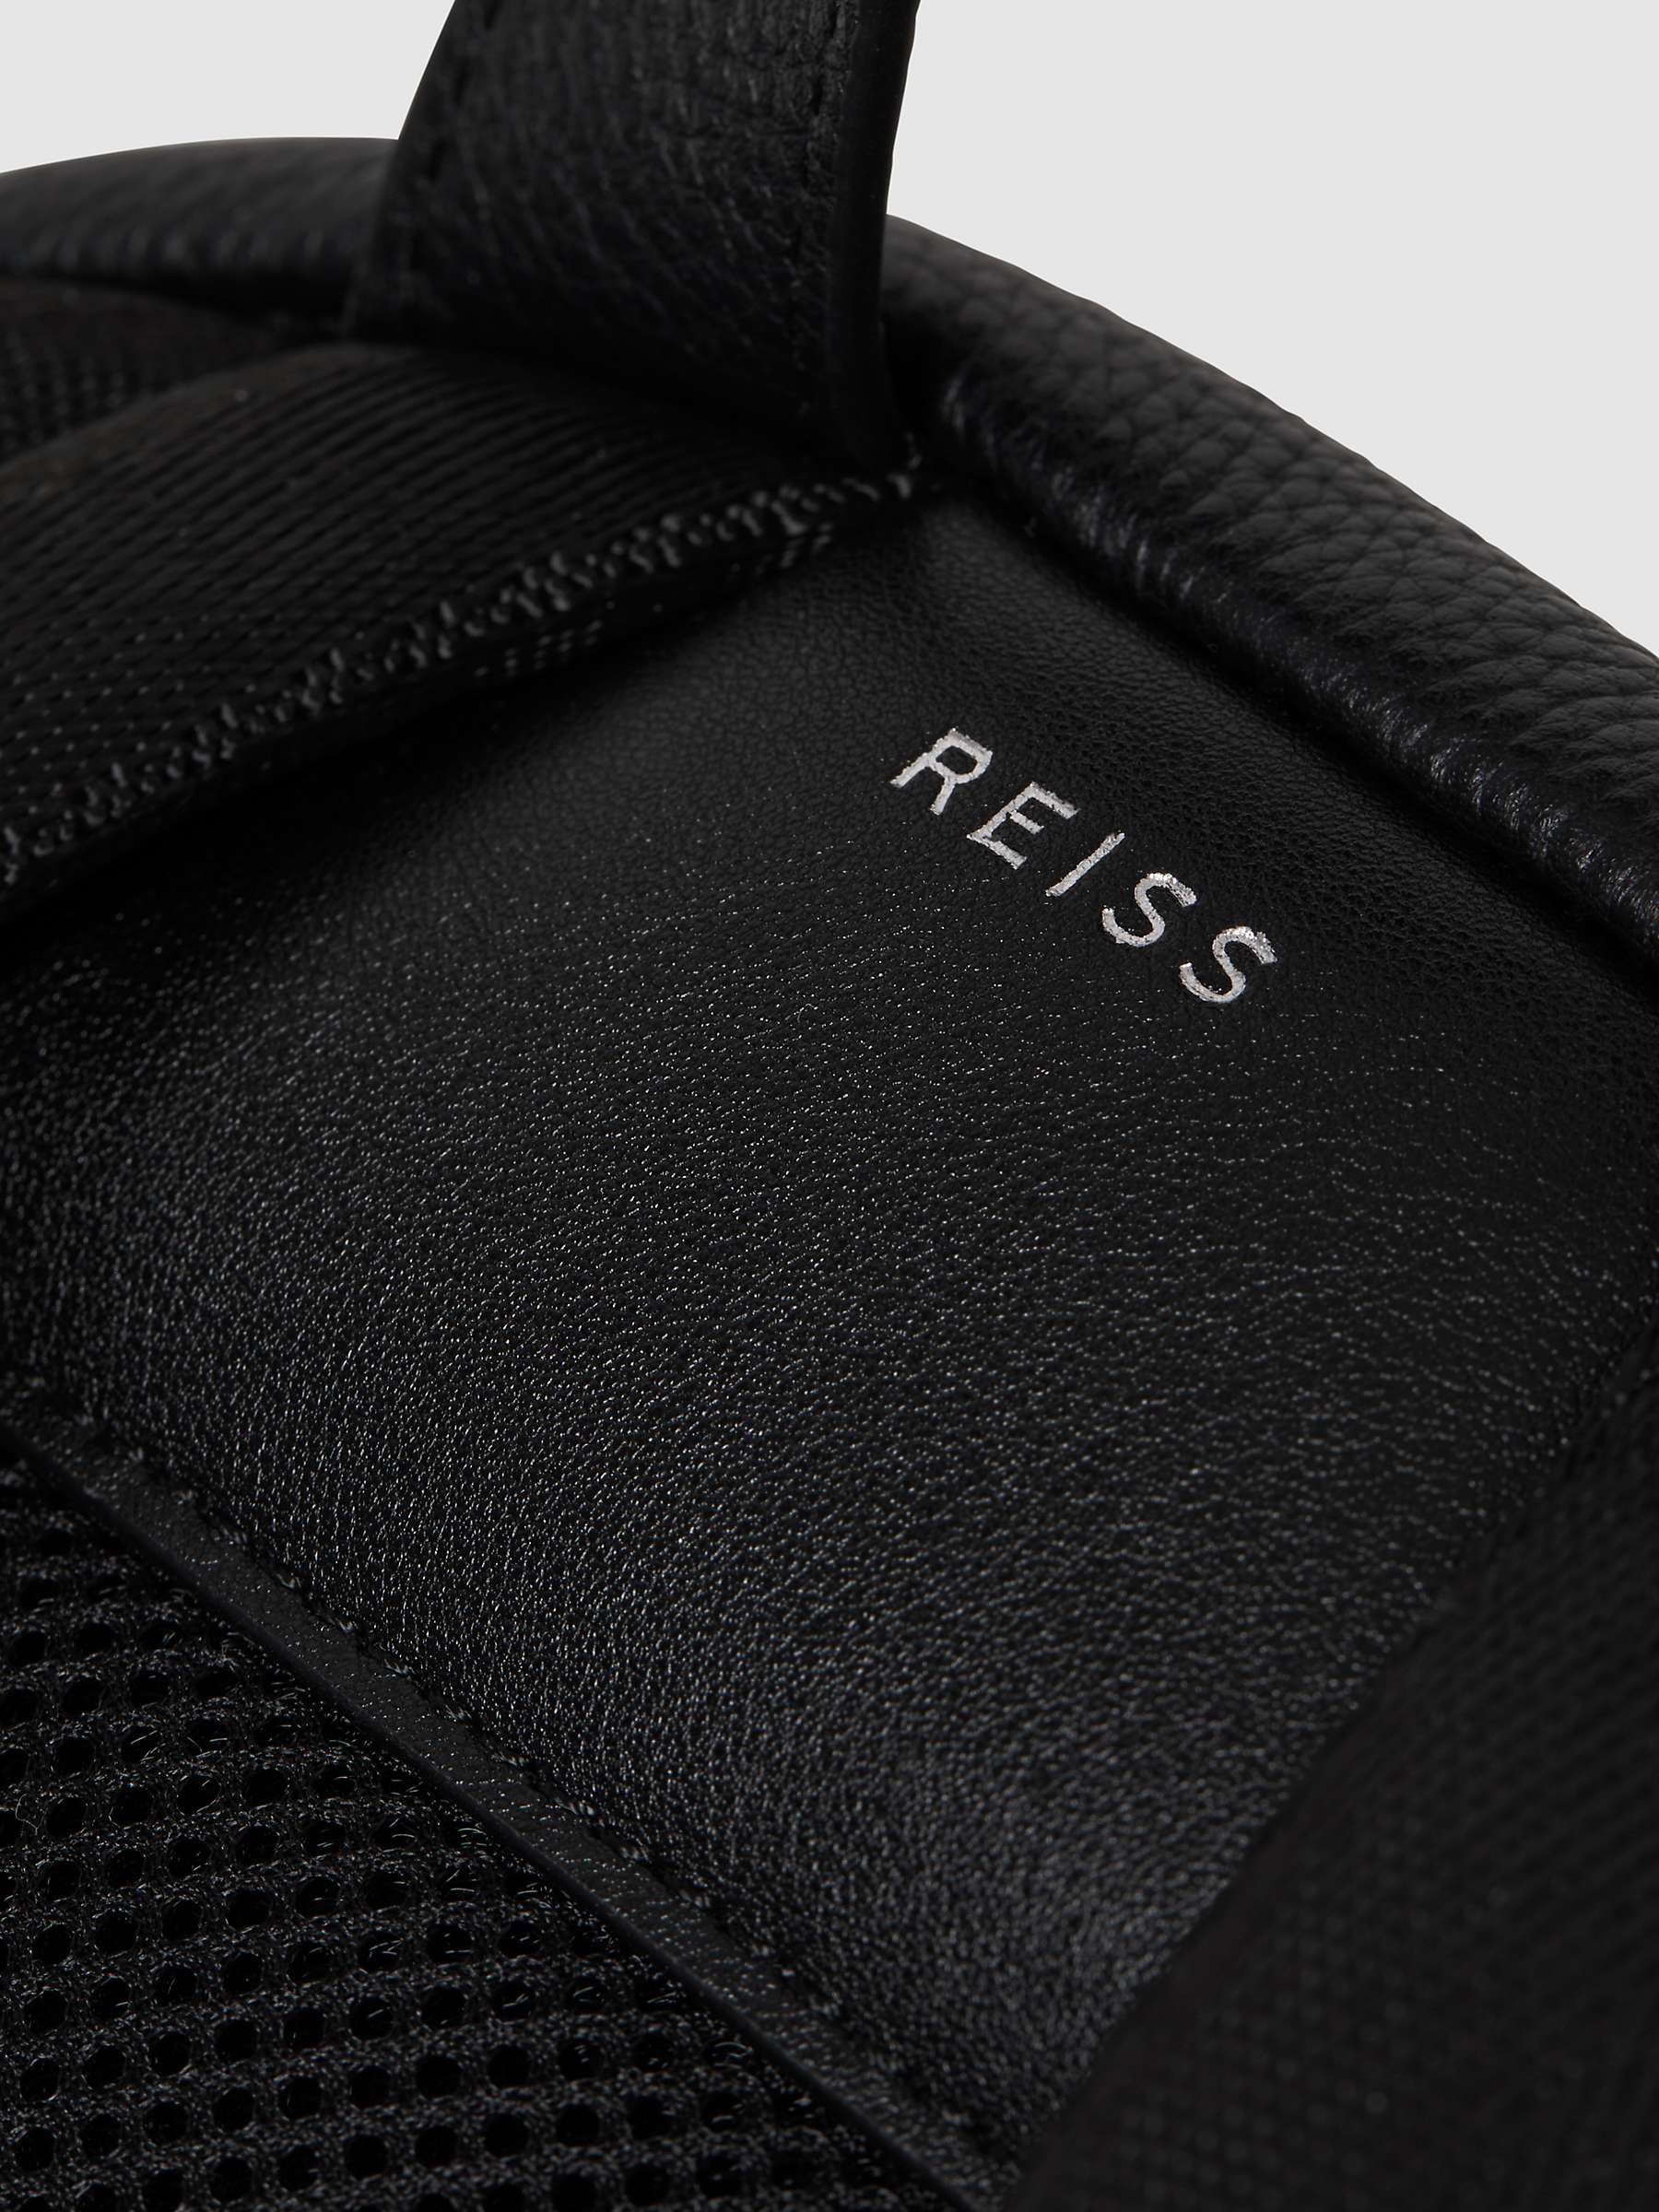 Buy Reiss Drew Leather Backpack Online at johnlewis.com